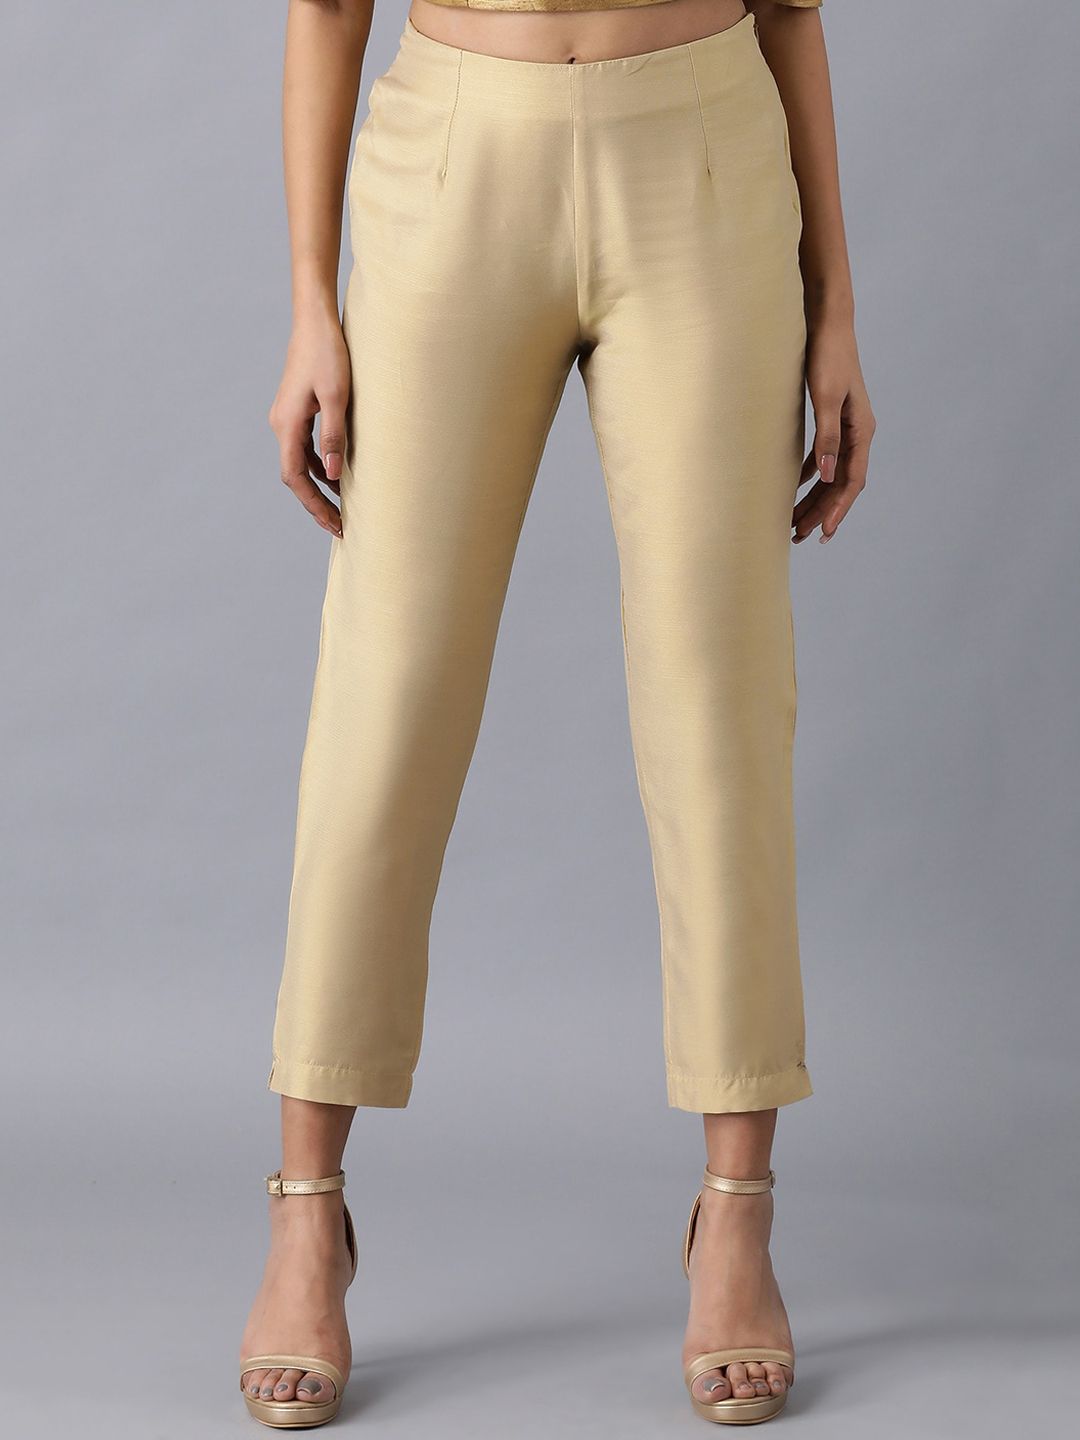 W Women Gold-Toned Slim Fit Trousers Price in India